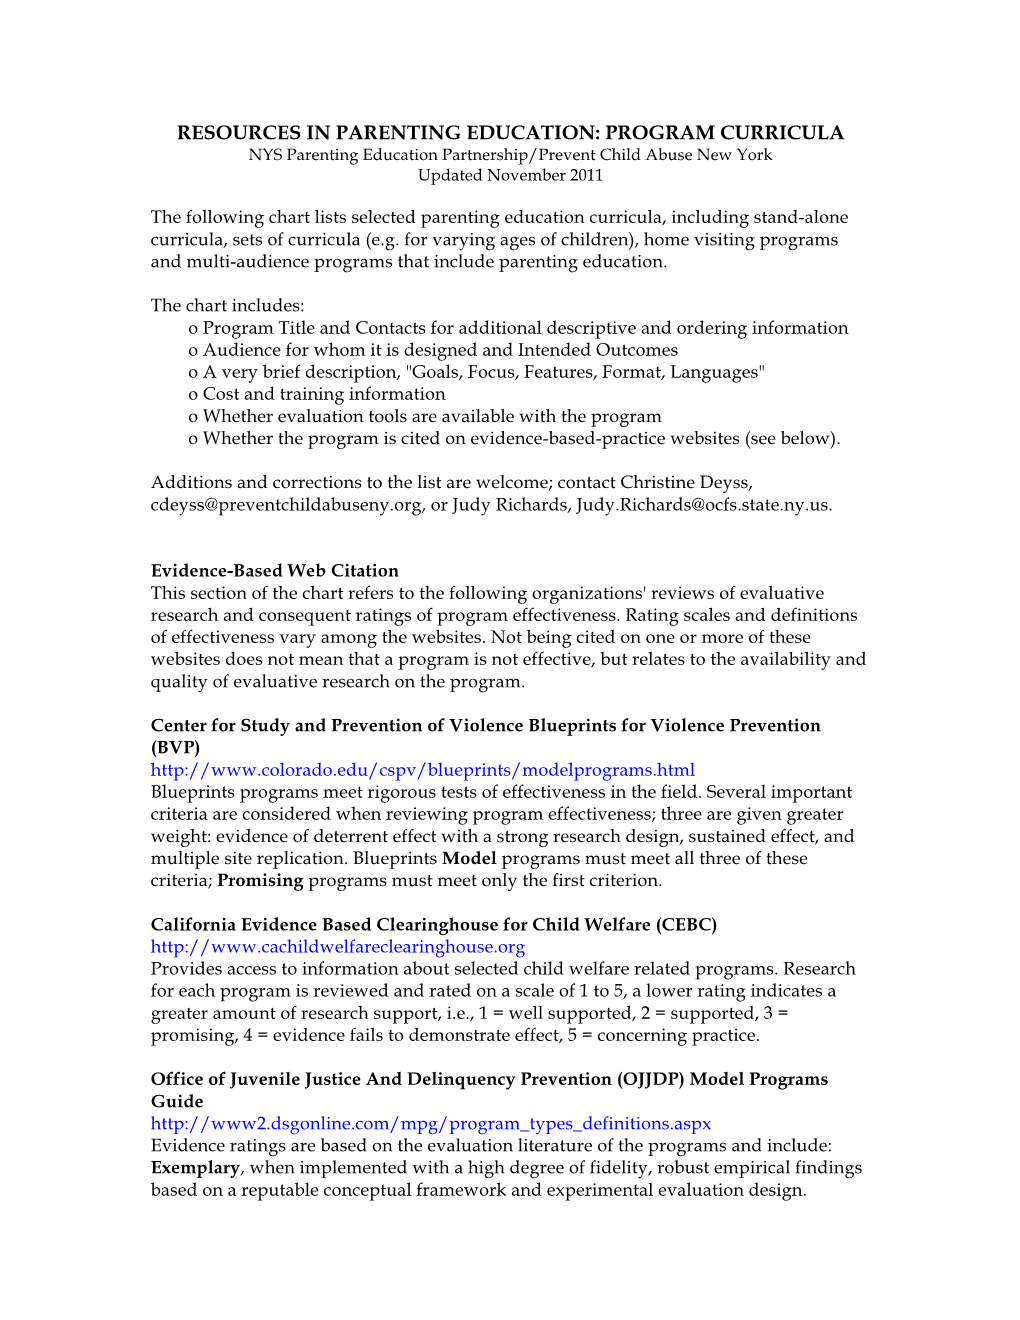 RESOURCES in PARENTING EDUCATION: PROGRAM CURRICULA NYS Parenting Education Partnership/Prevent Child Abuse New York Updated November 2011